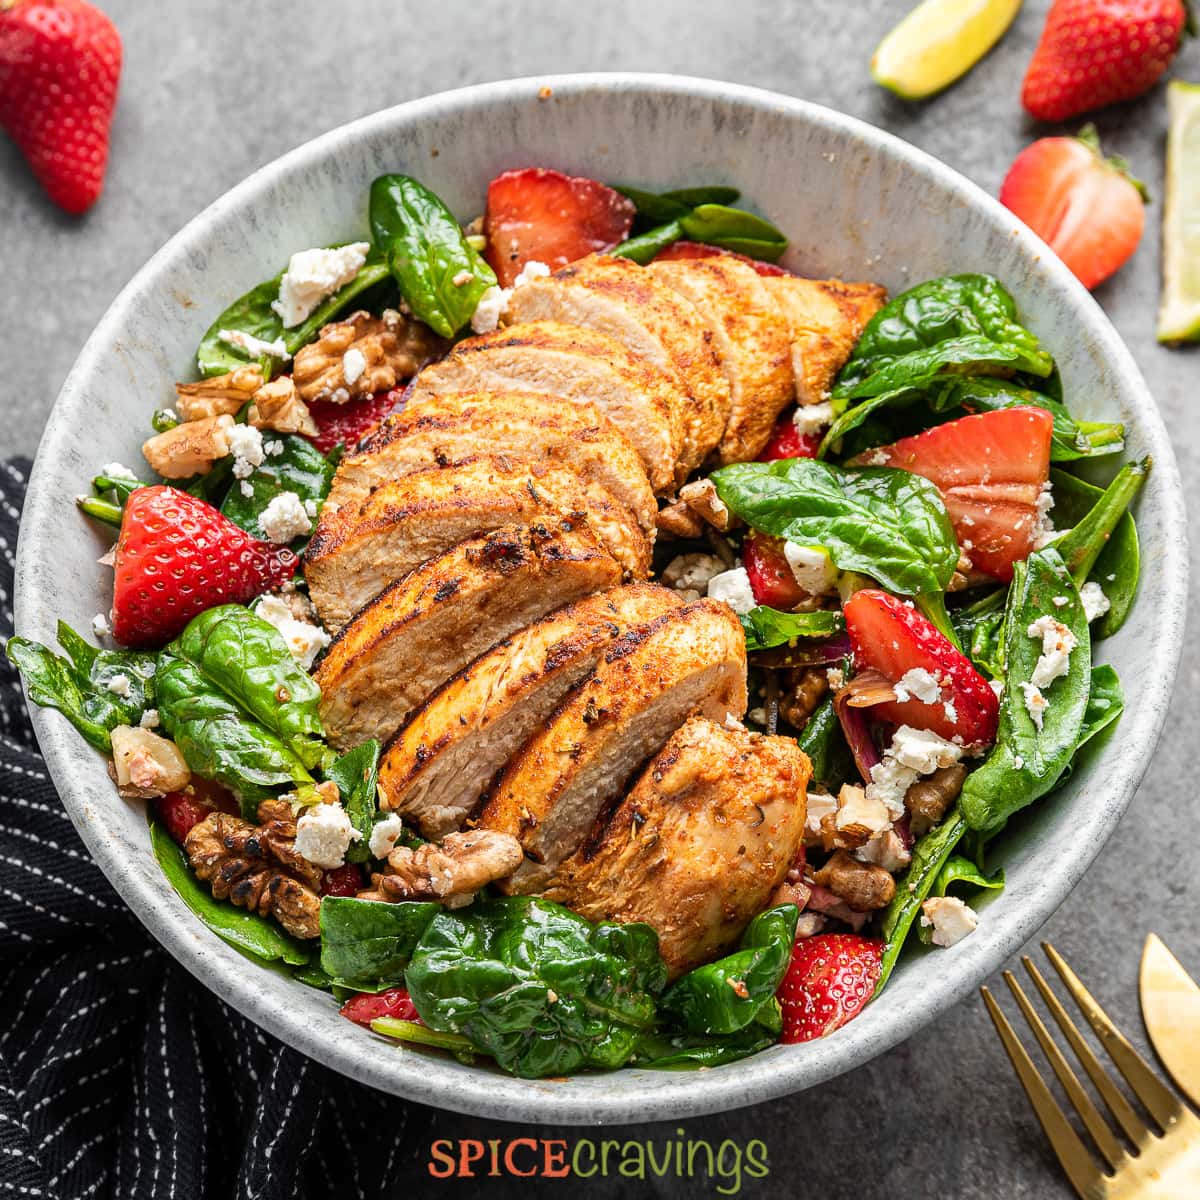 https://spicecravings.com/wp-content/uploads/2022/05/Strawberry-Spinach-Salad-Featured.jpg